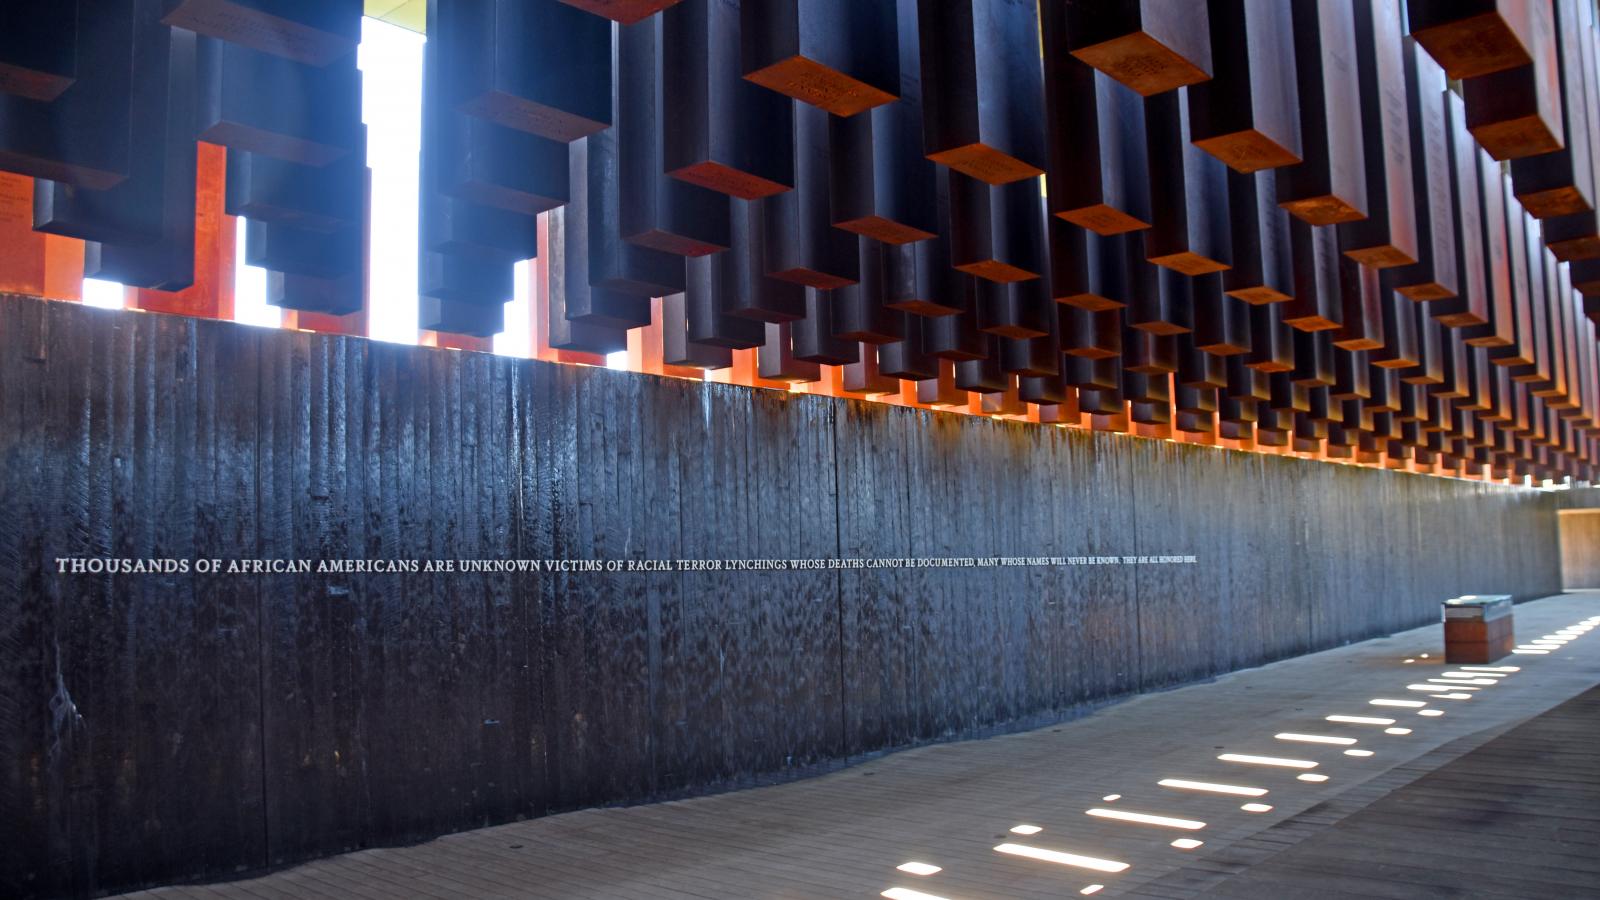 Large metal columns hang suspended in the air next to a stone wall as part of the National Memorial for Peace and Justice